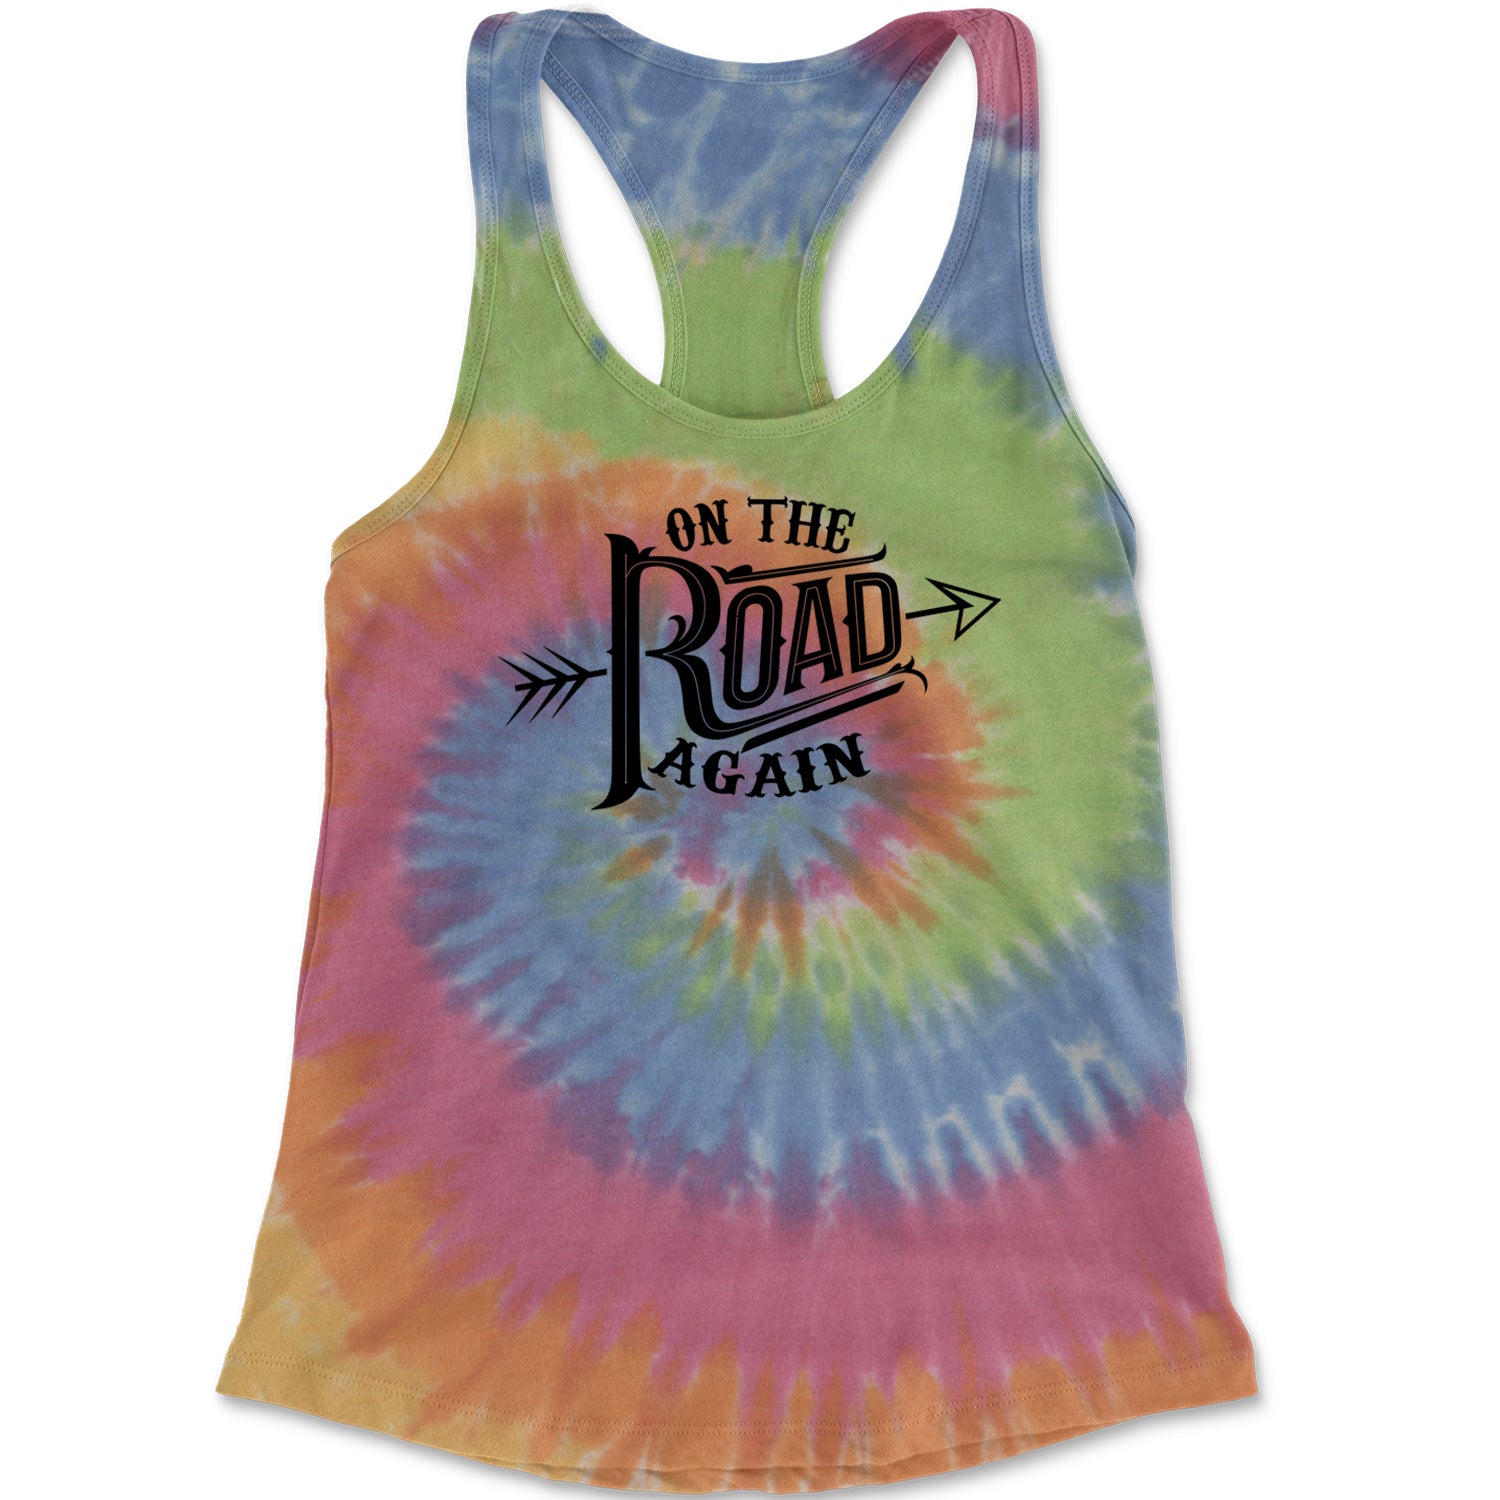 On The Road Again Hippy Country Music Racerback Tank Top for Women